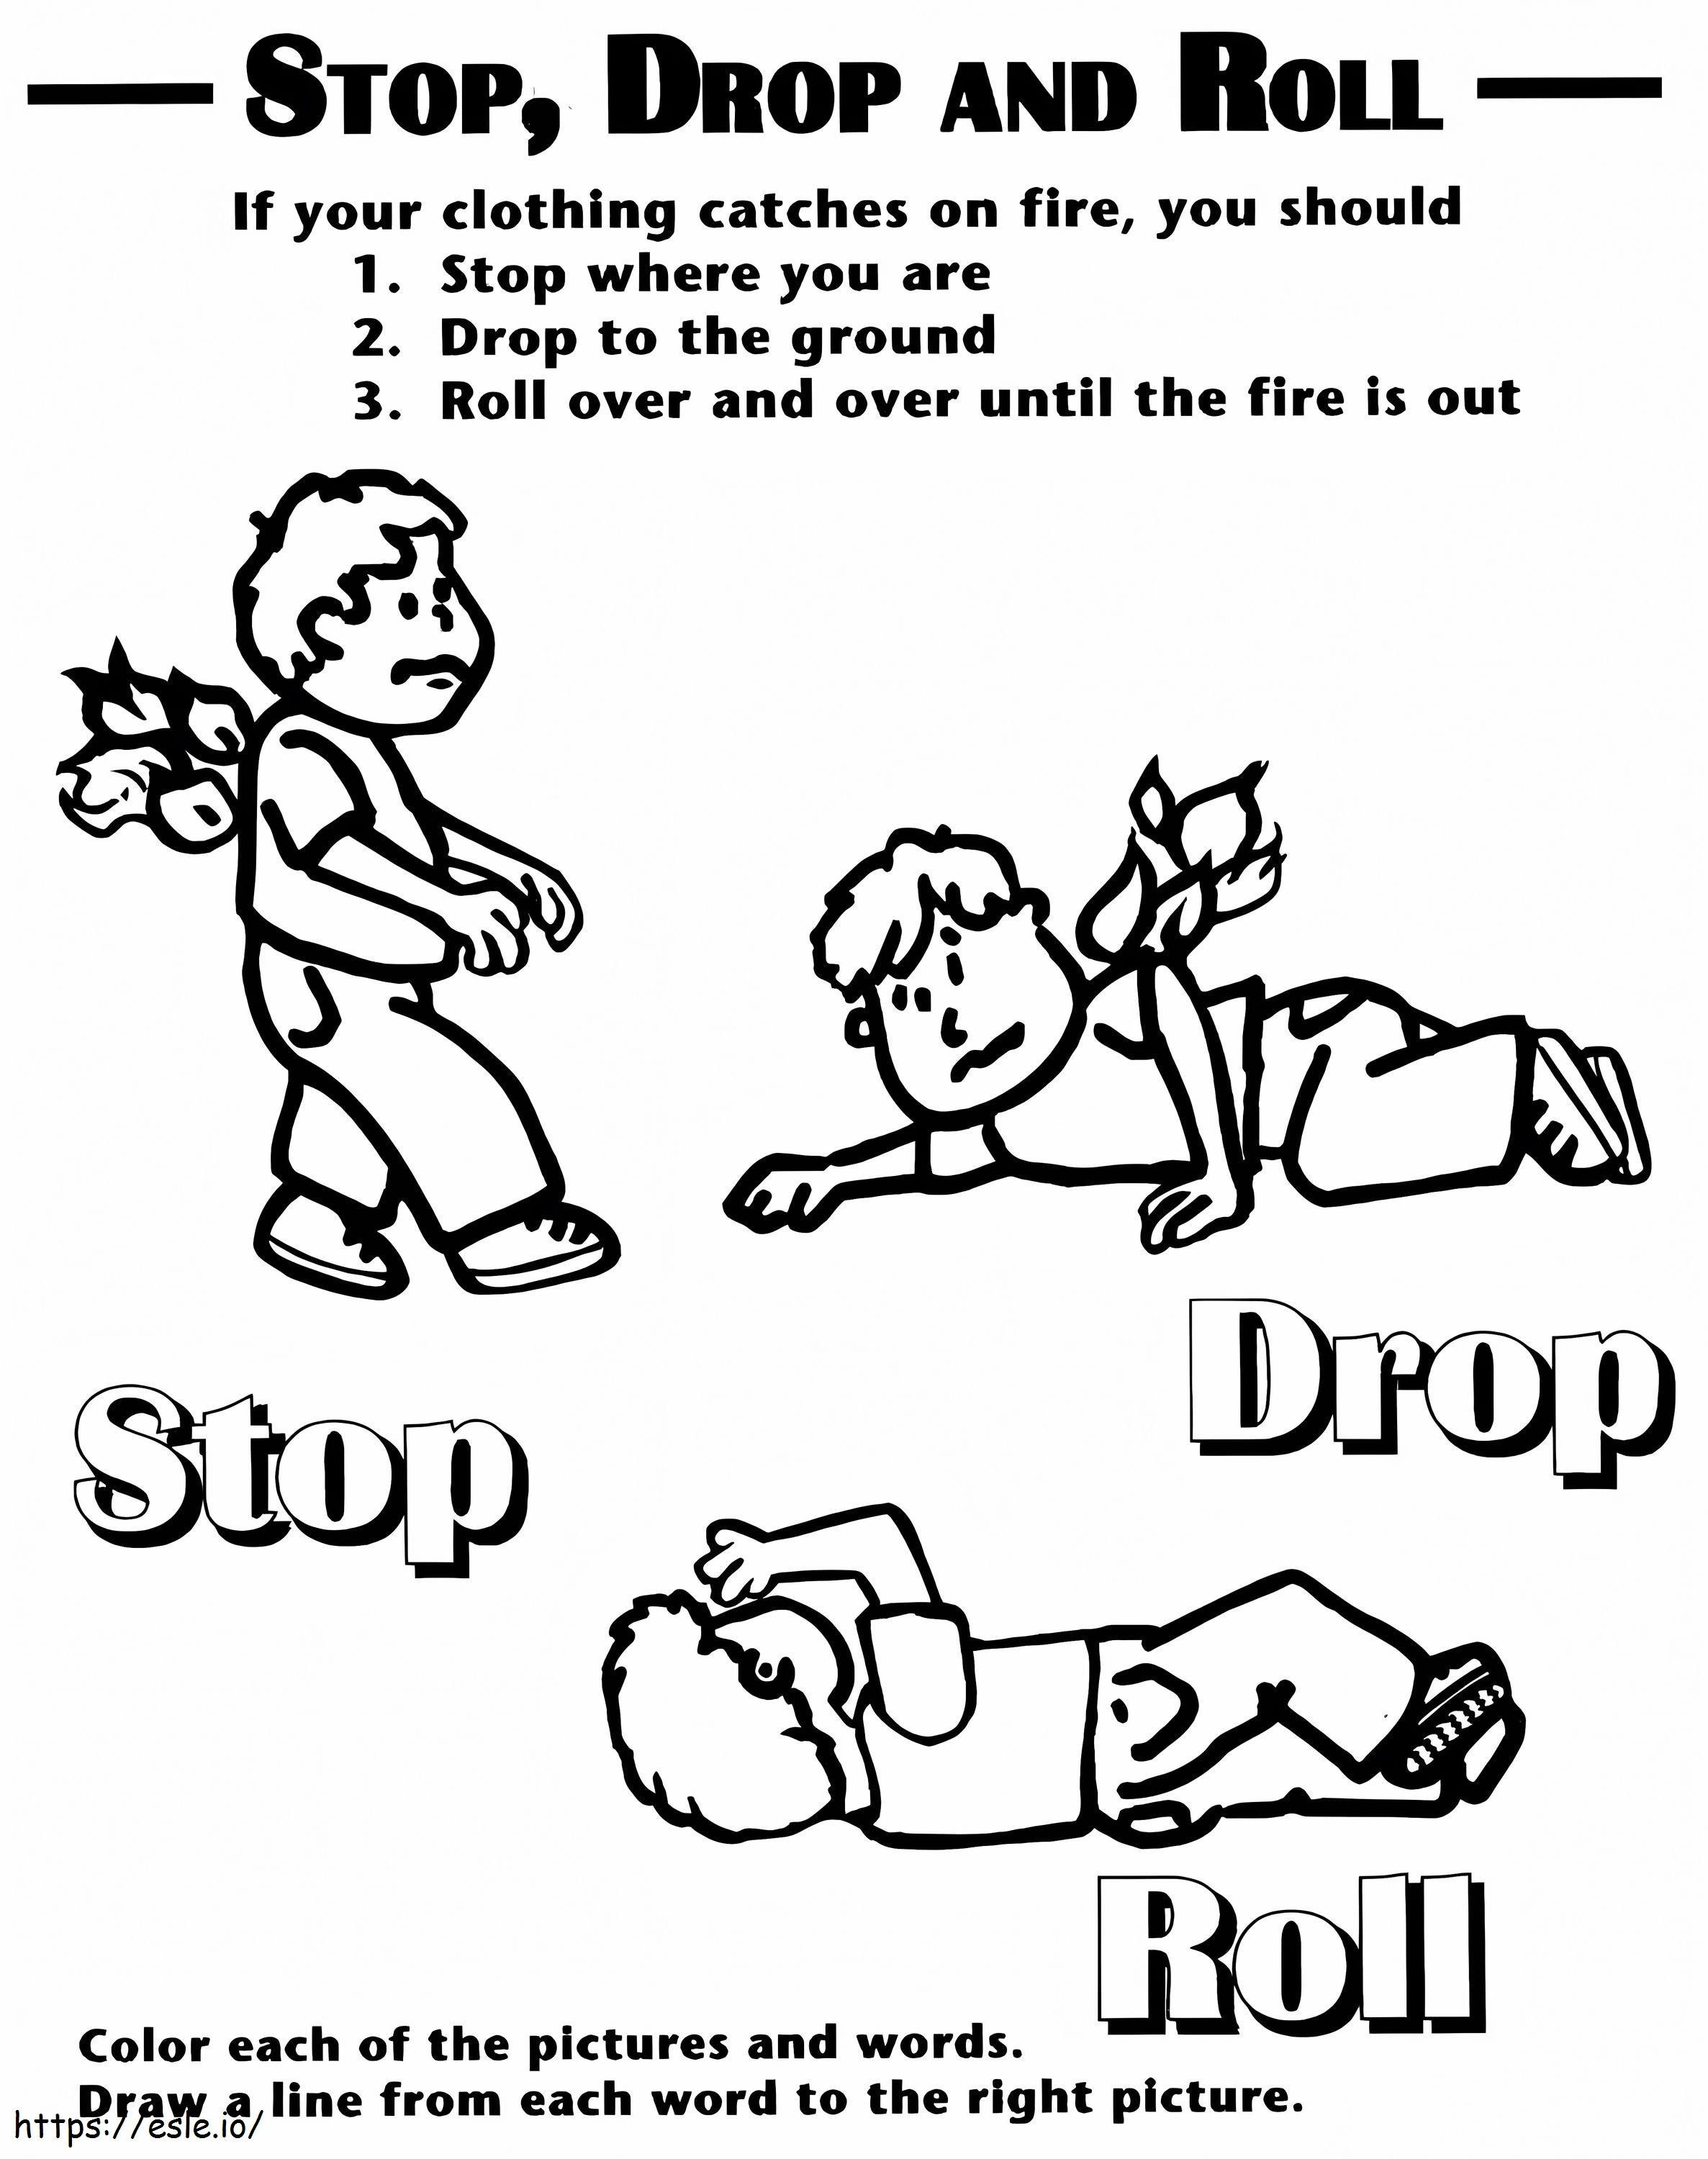 Stop Drop And Roll Fire Safety 2 coloring page